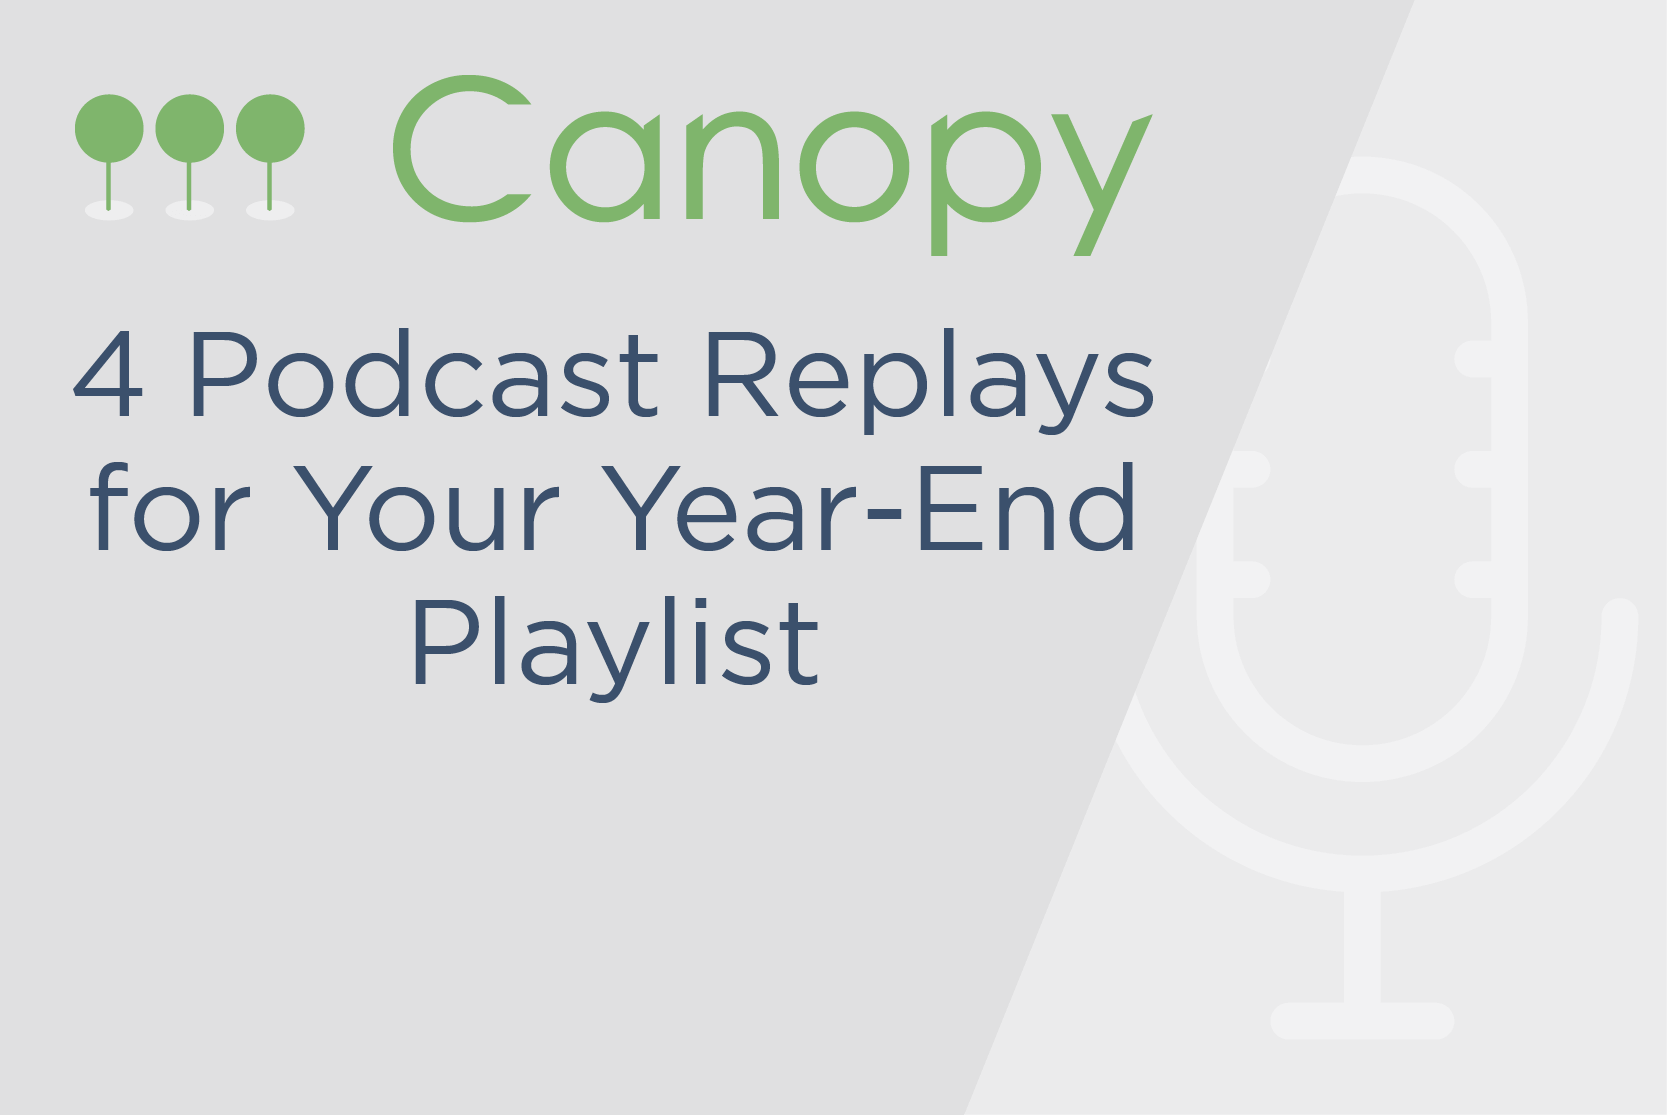 Canopy logo with blog post title (4 Podcast Replays for Your Year-End Playlist) and microphone icon